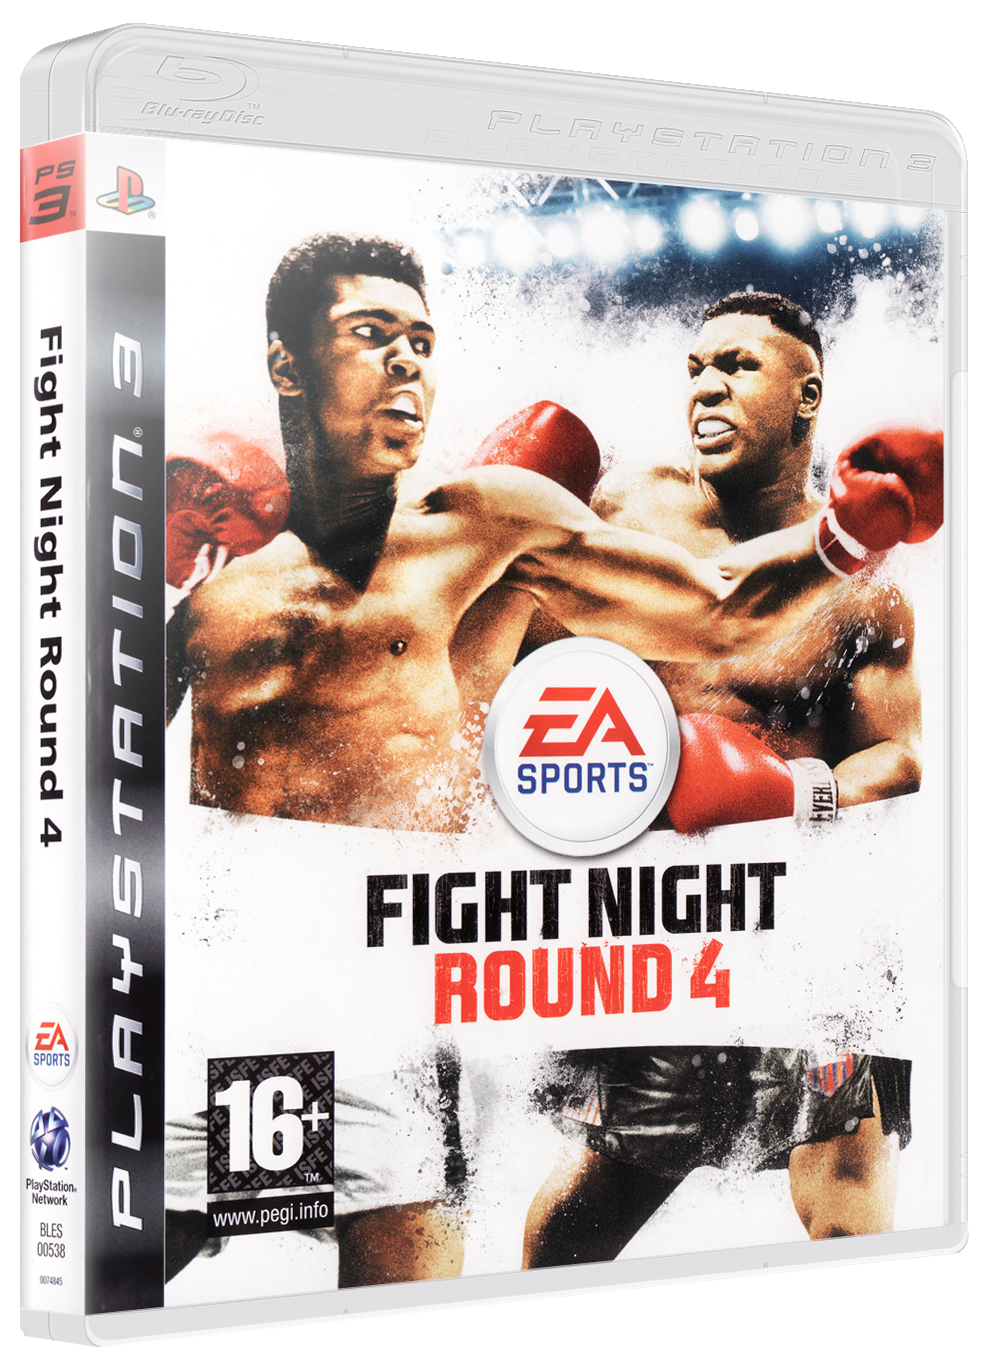 Fight Night Round 4 Images - LaunchBox Games Database